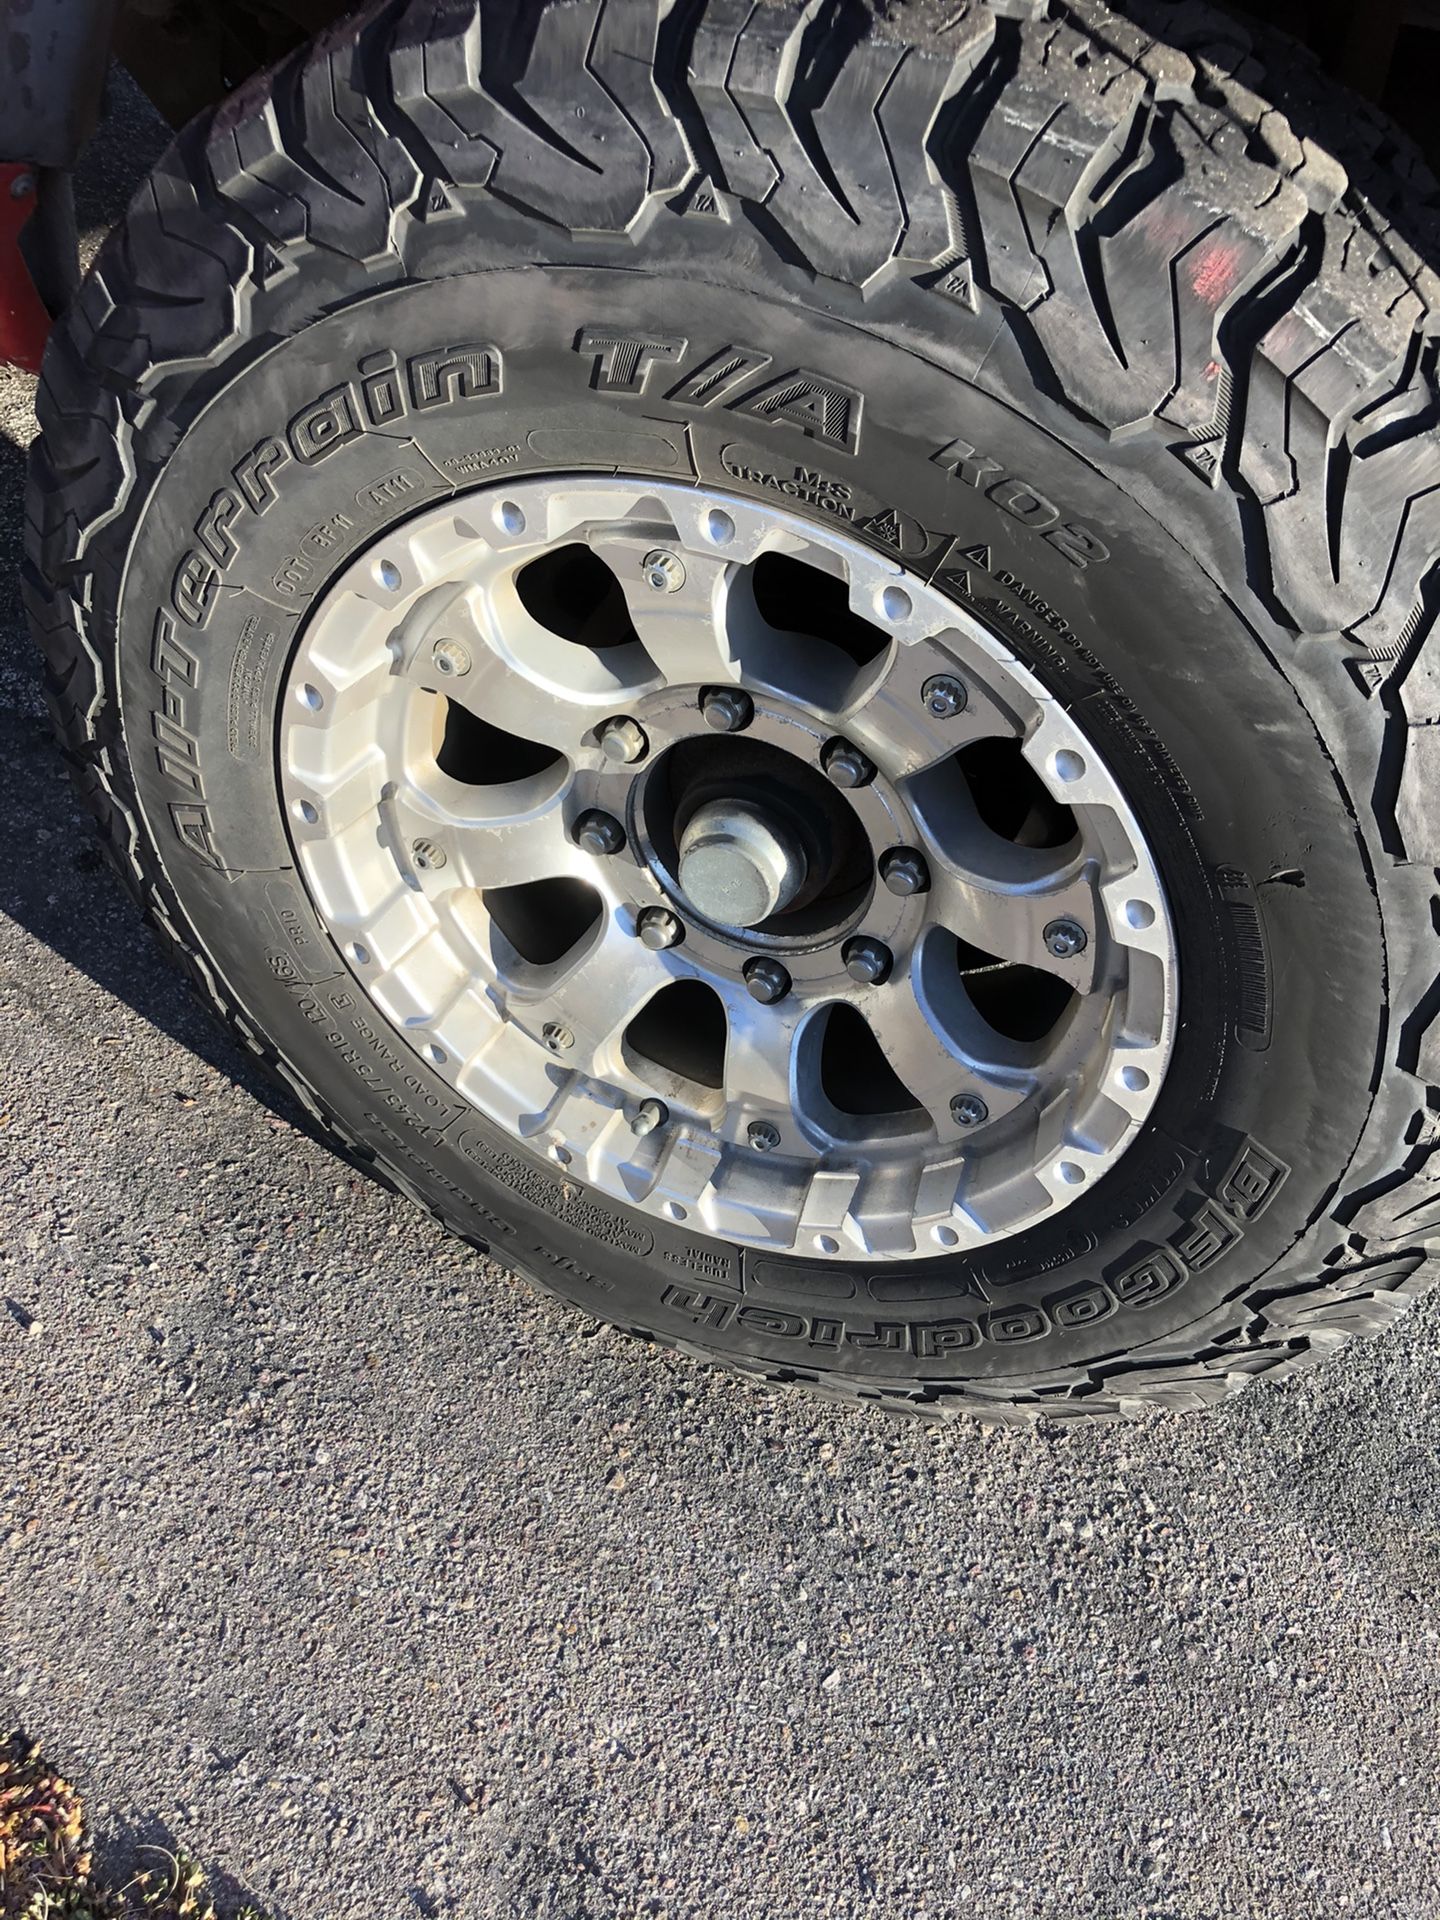 Ford Chevy dodge wheels and tires lug 8x6.5